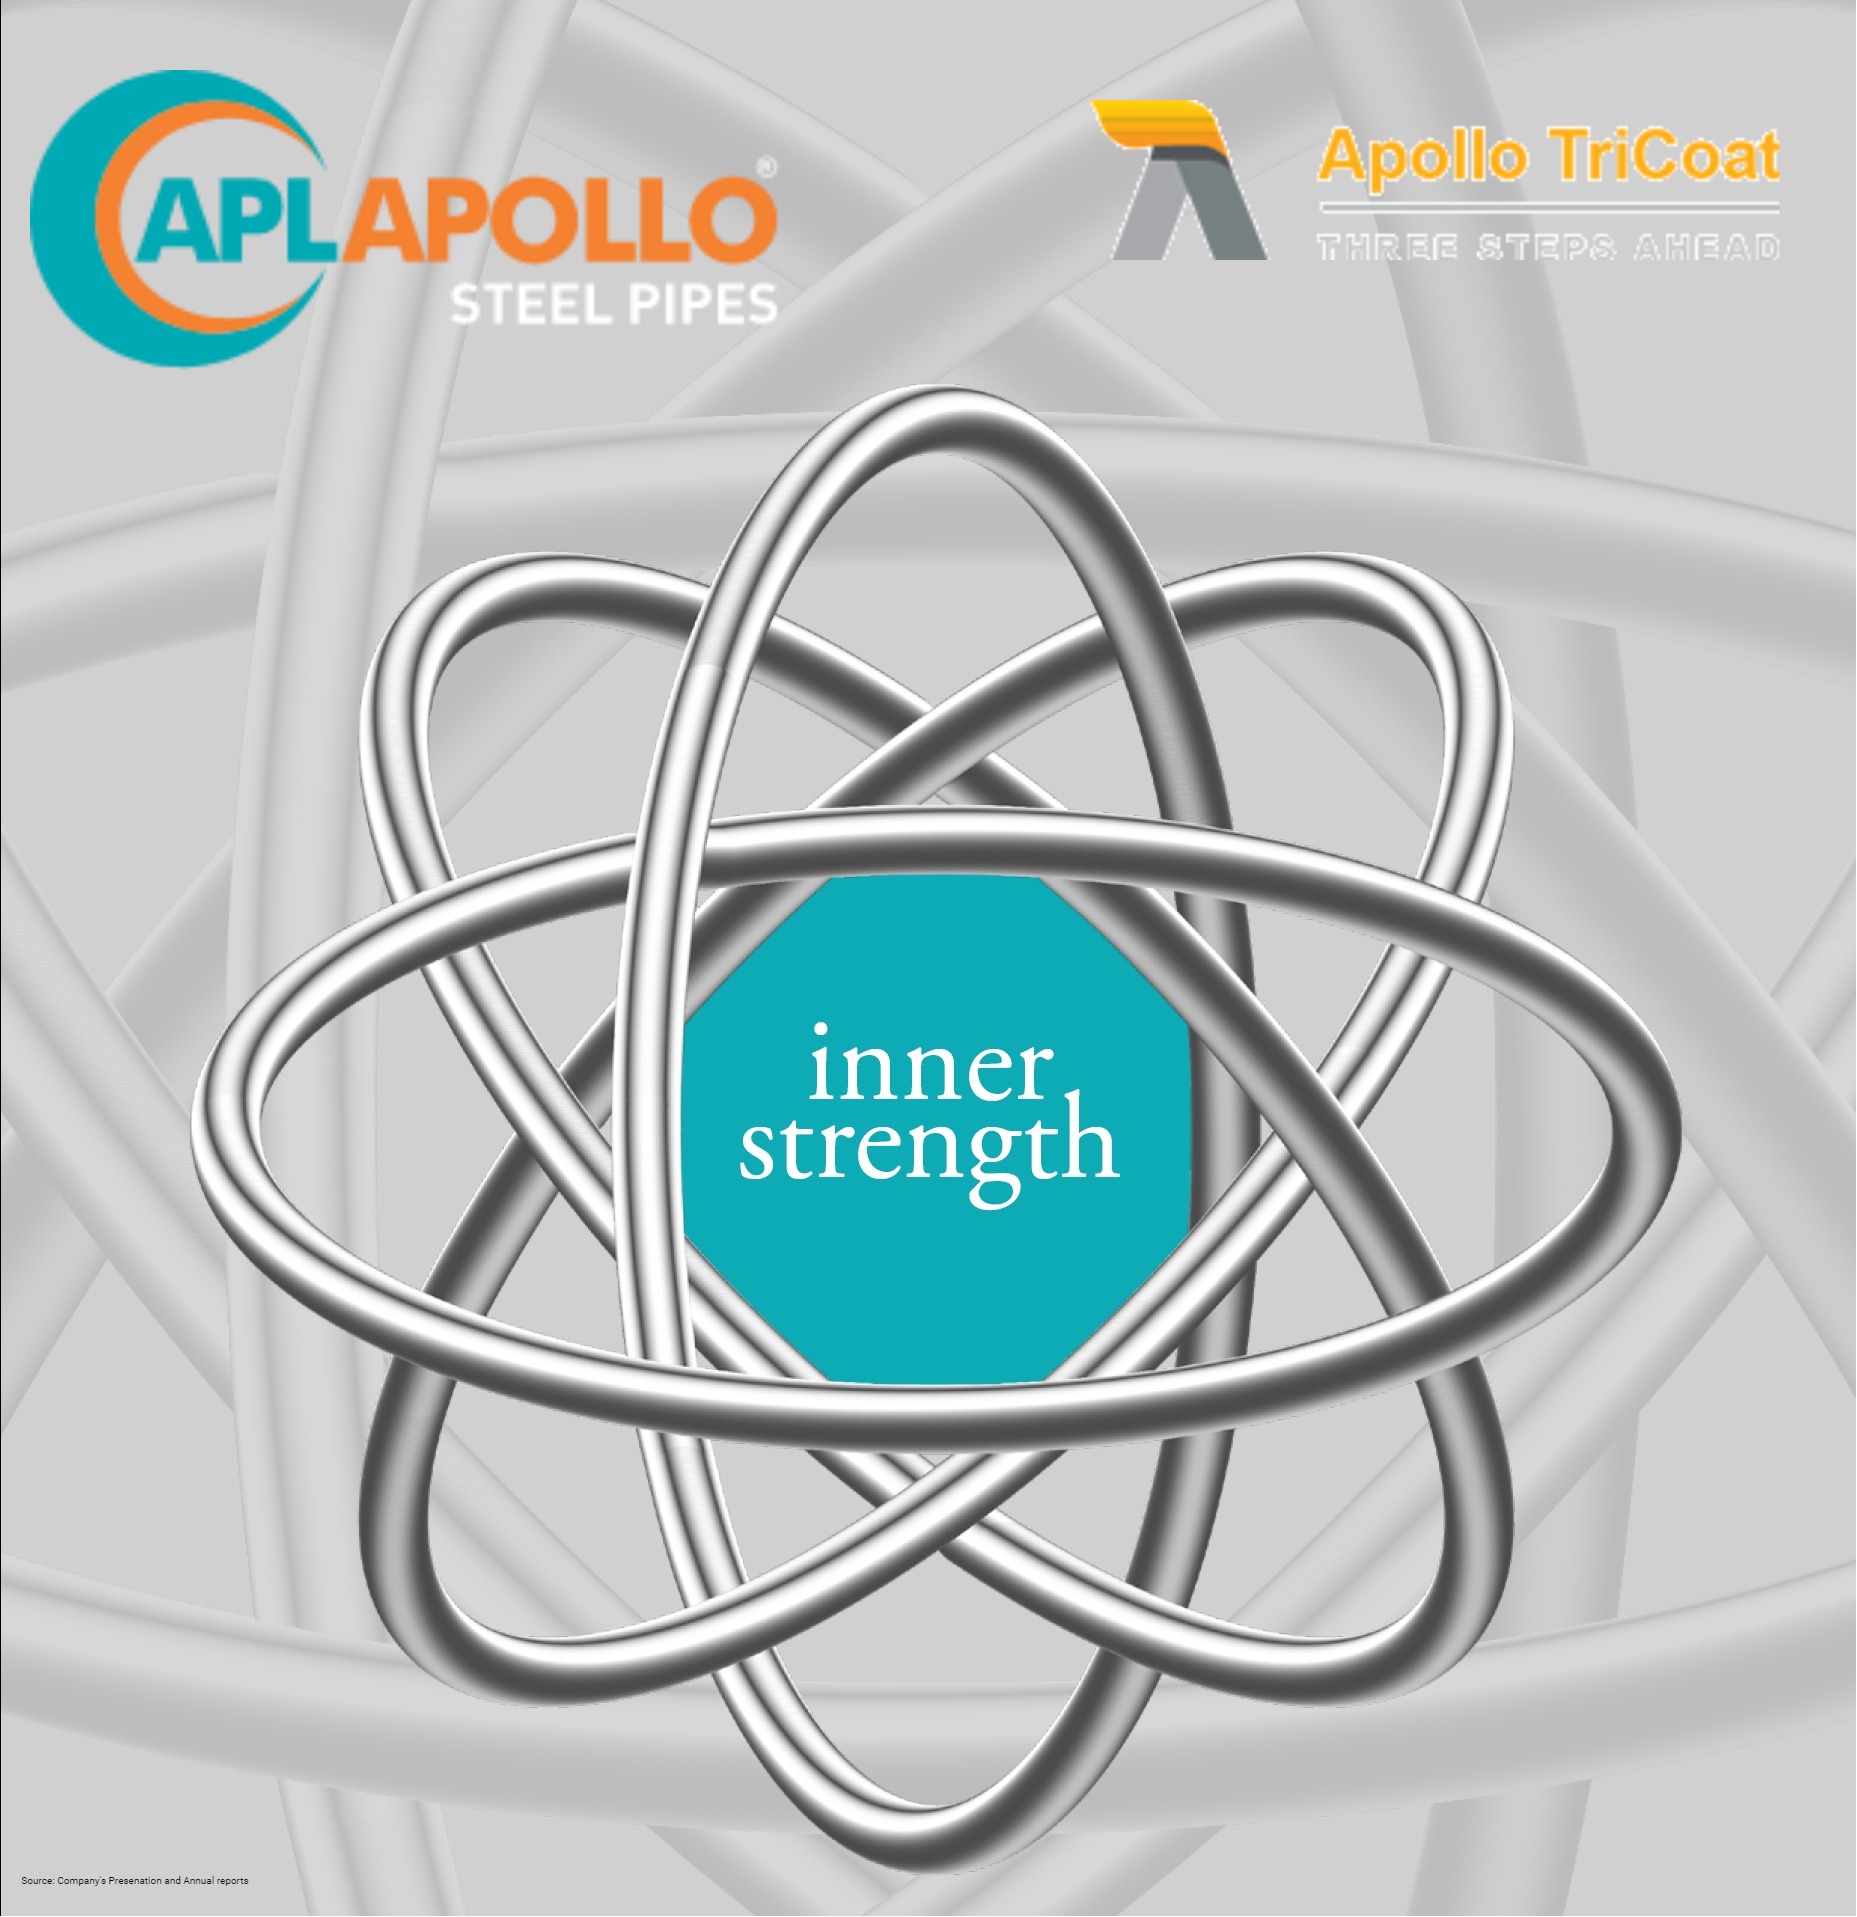 APL-Apollo-Tricoat-Merger-Subsidiary-Products